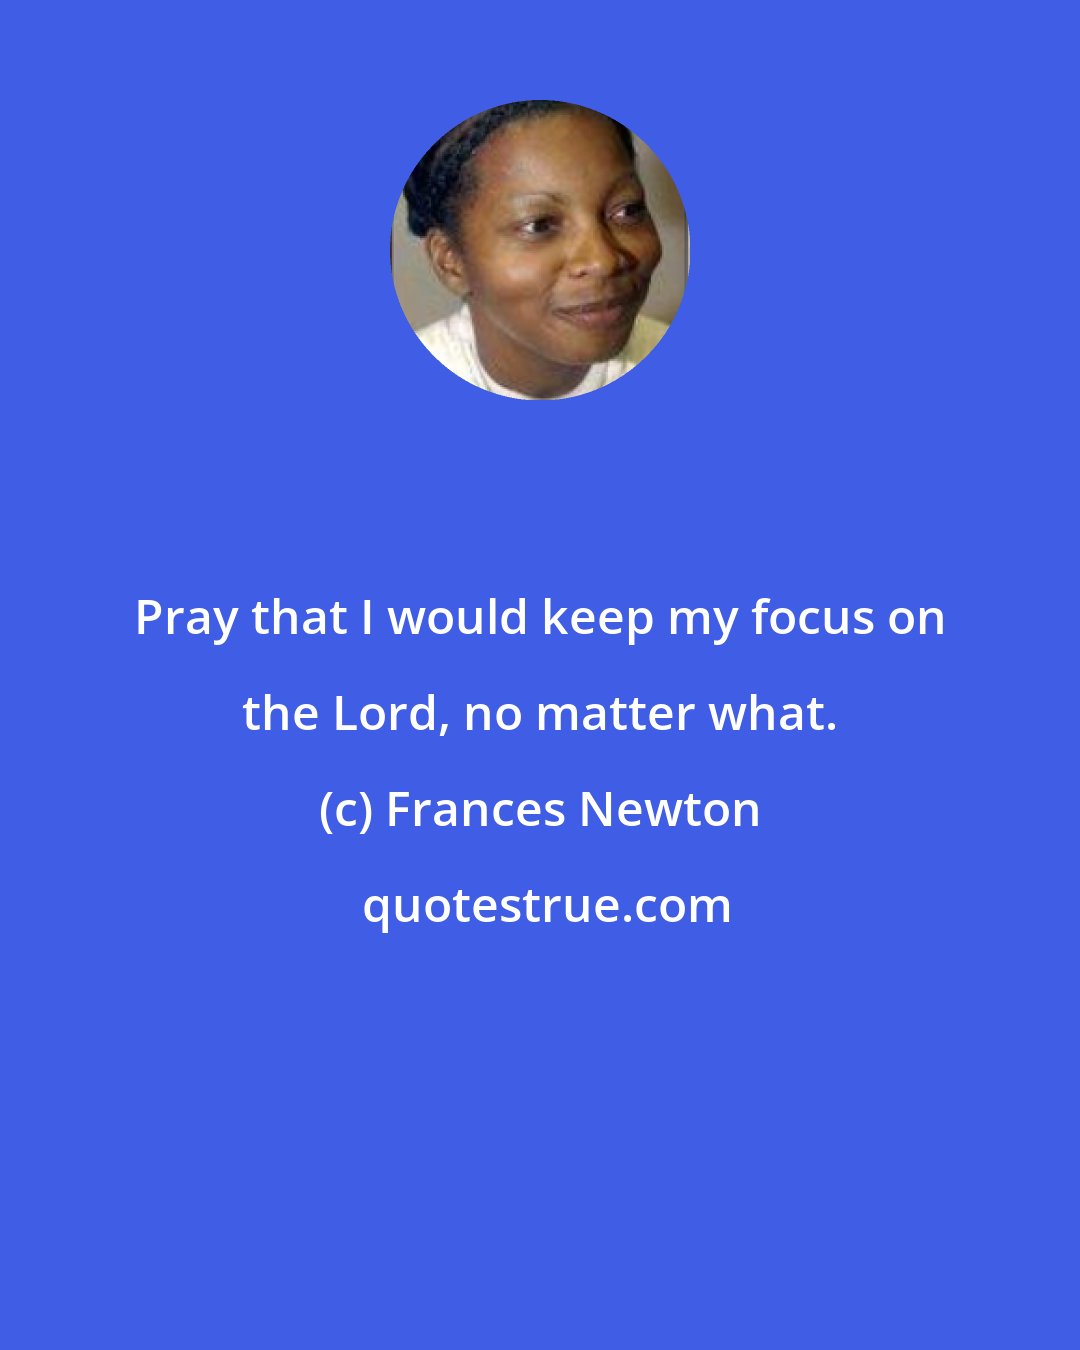 Frances Newton: Pray that I would keep my focus on the Lord, no matter what.